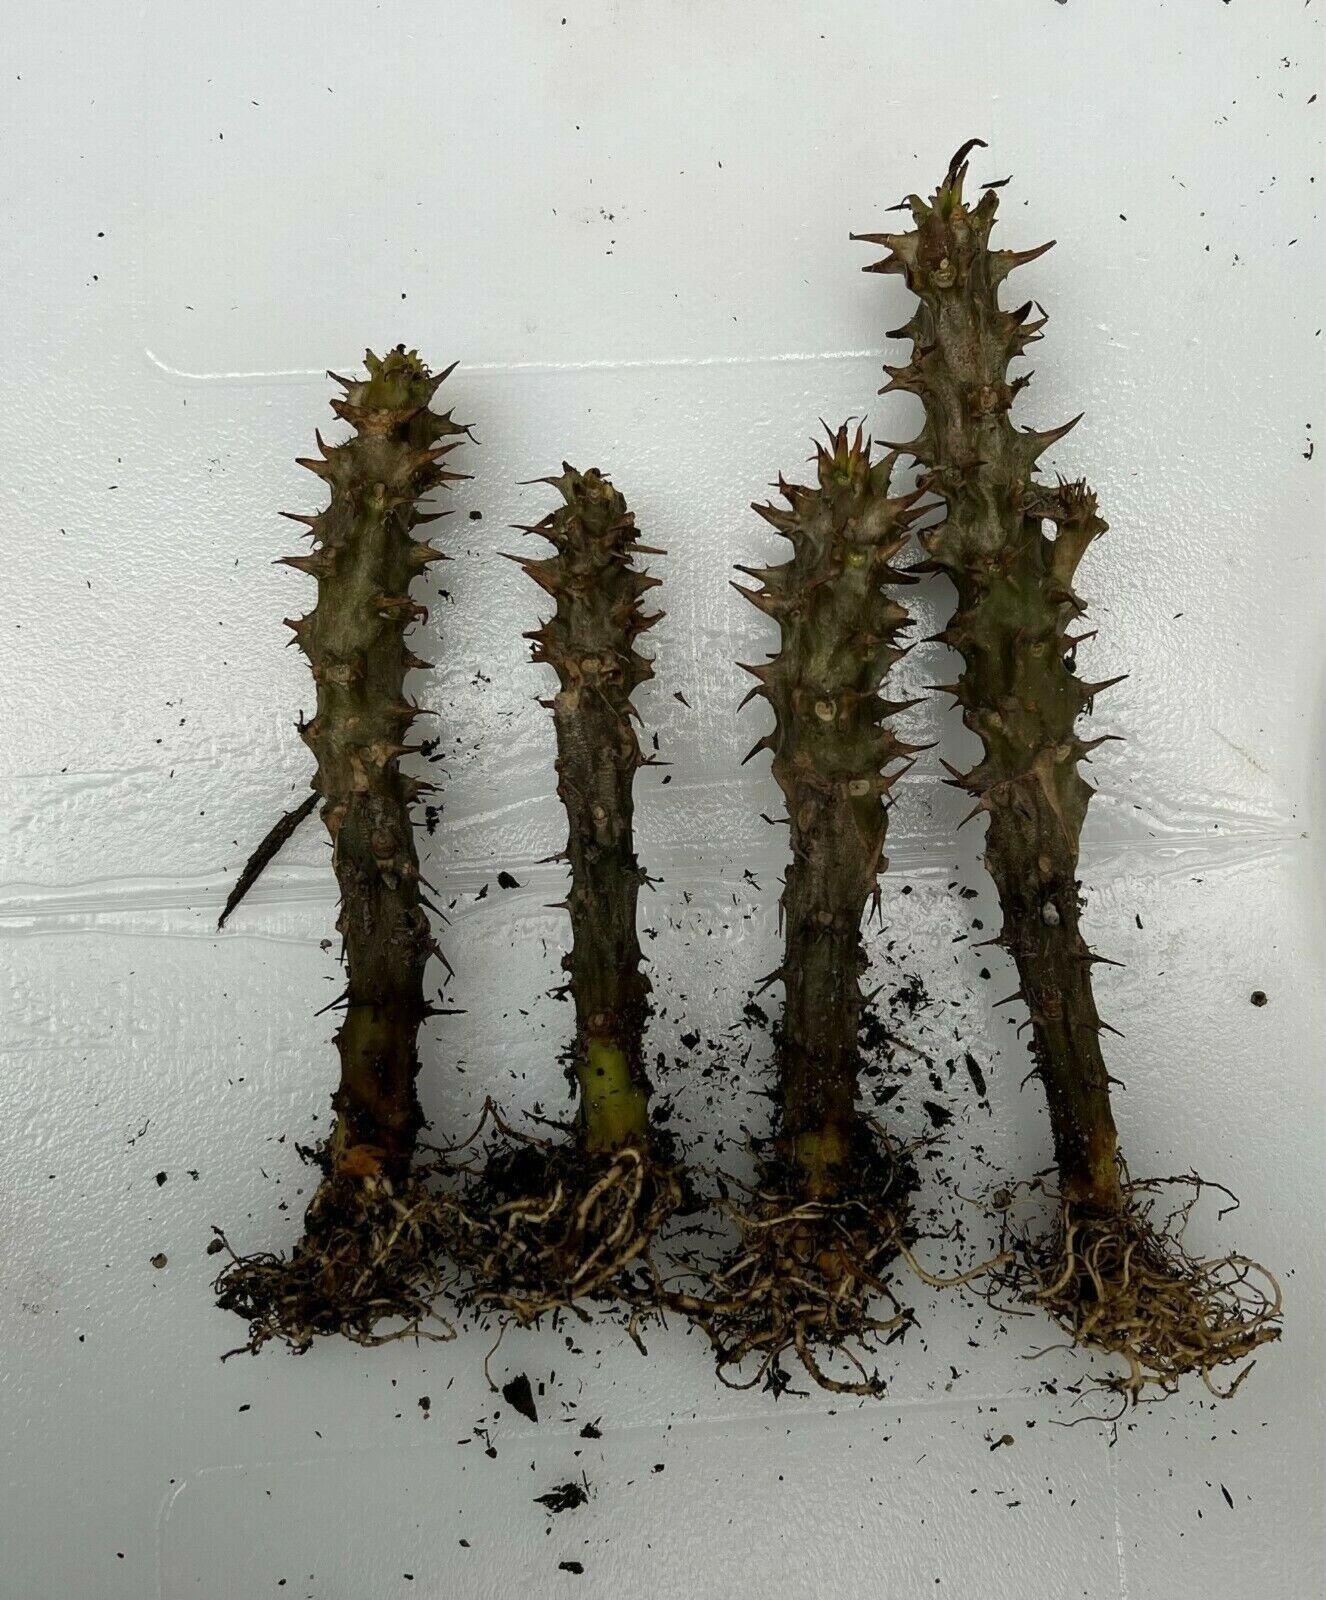 1 Snow Princess Of Thorns Plant Euphorbia Milii Starter Plants Well Rooted